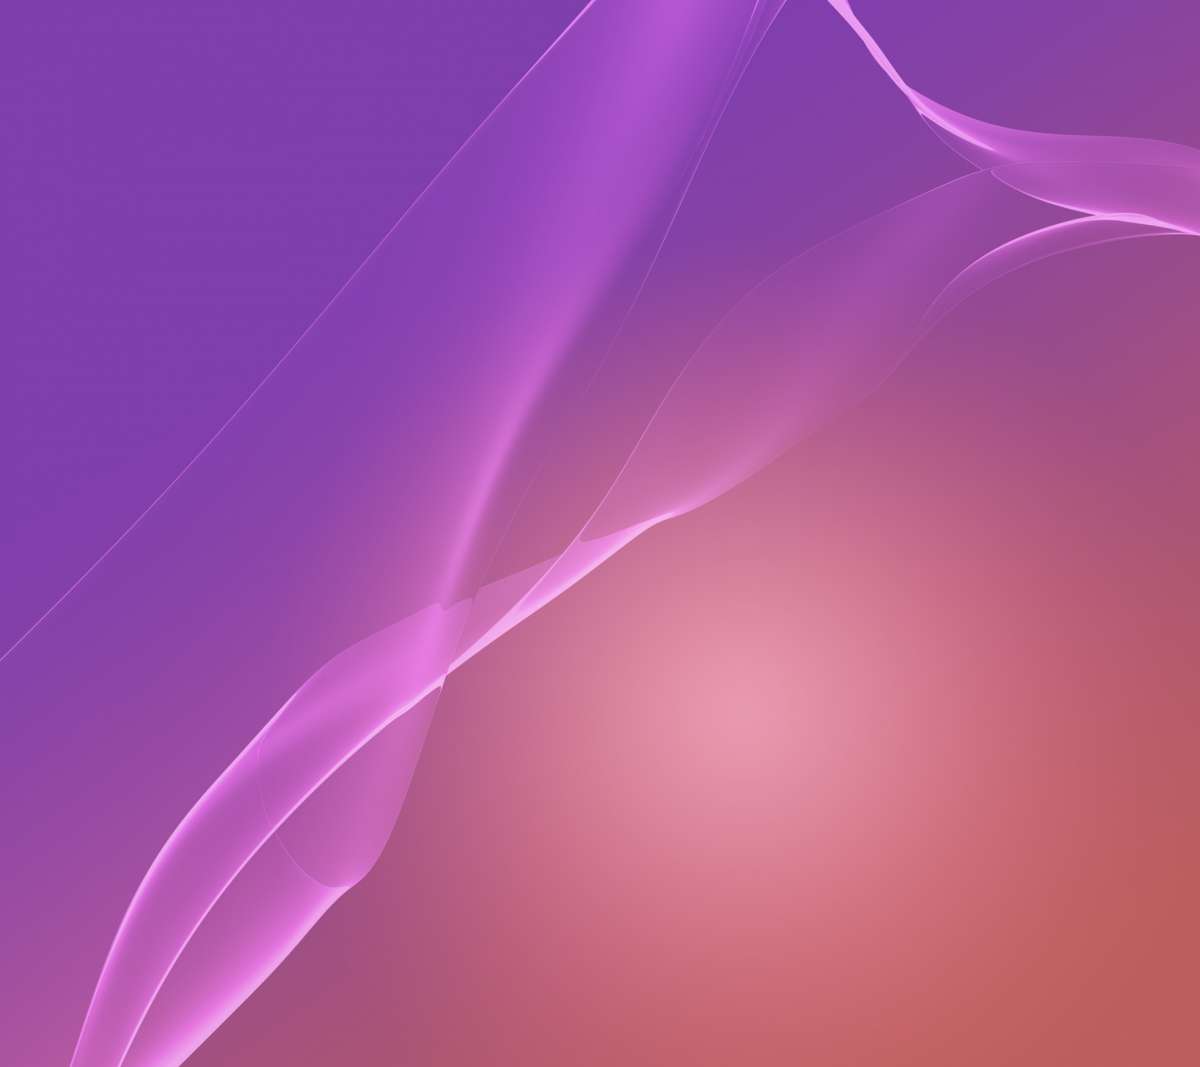 Get The Sony Xperia Z2 Wallpaper Here Now